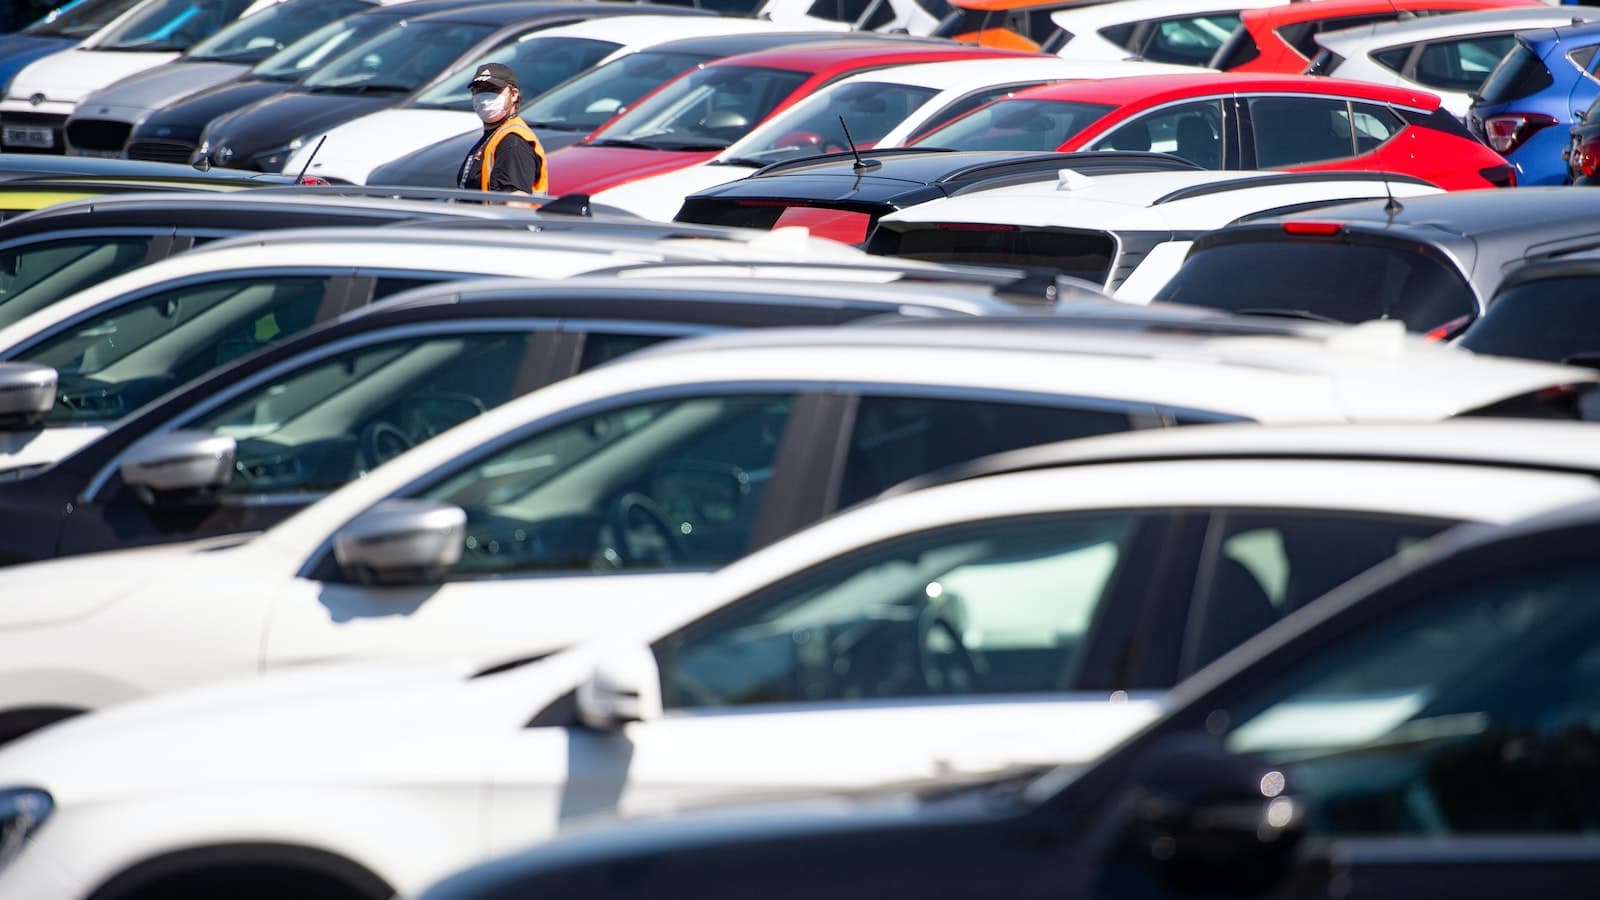 Car dealerships in Wales can reopen from 22 June after lockdown restrictions are eased